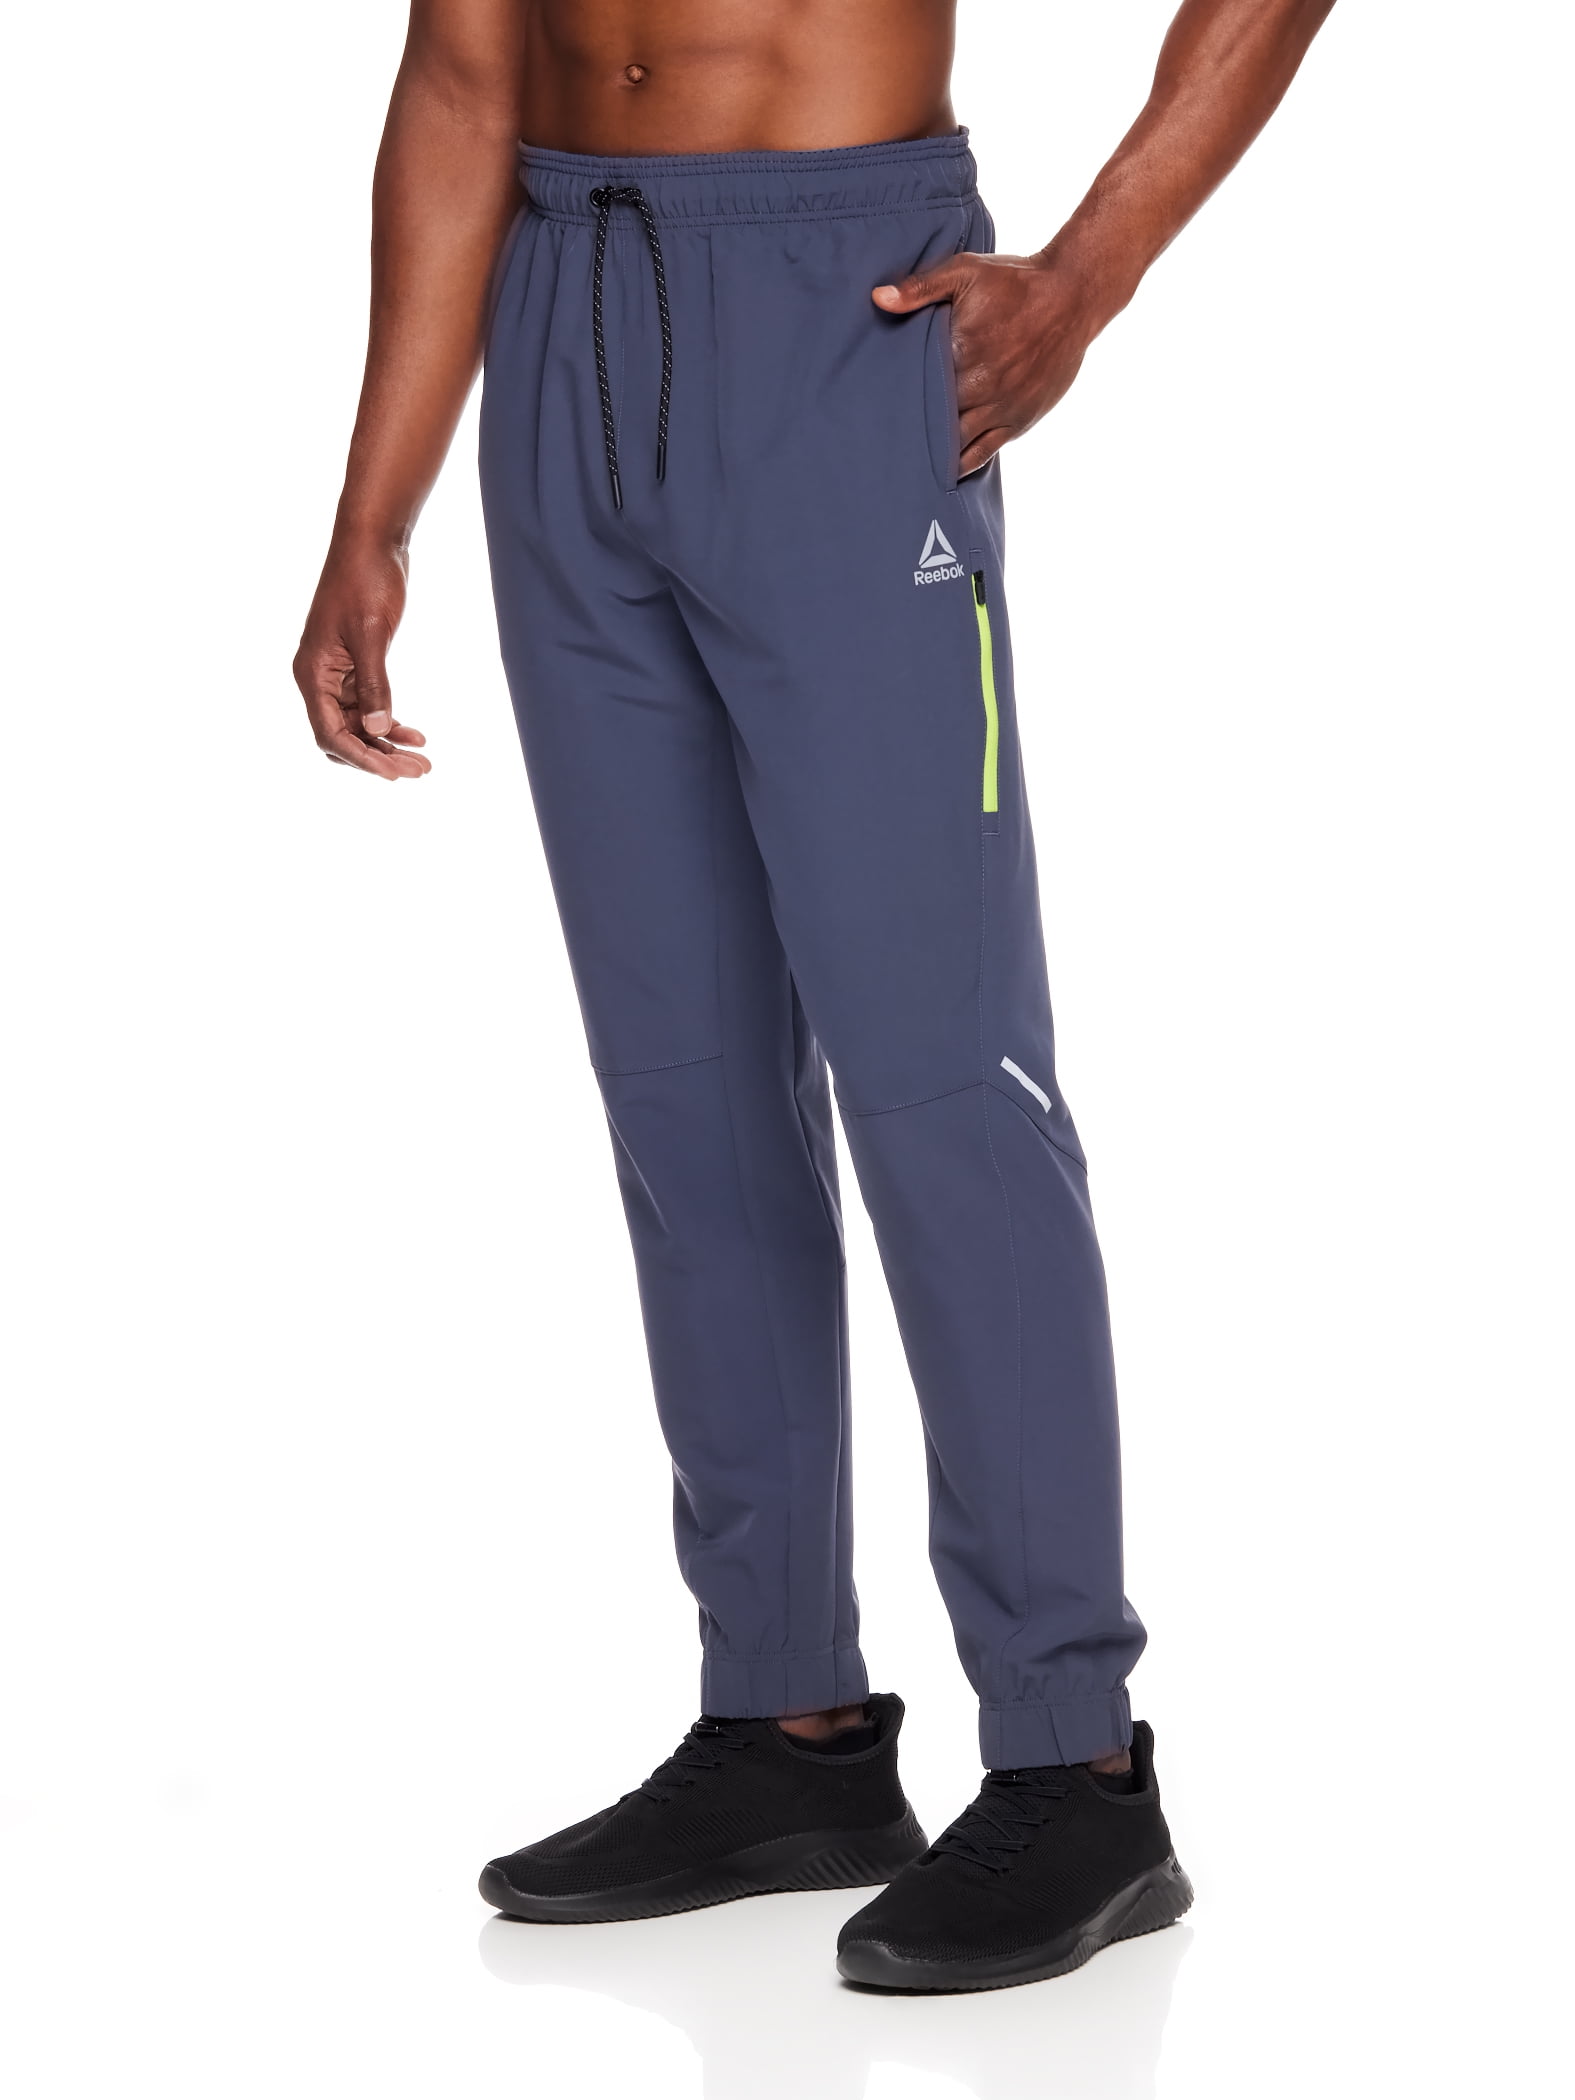 Buyr.com | Clothing | Reebok Men's Track & Running Pants with Zipper  Pockets - Athletic Workout Training & Gym Pants for Men - Tremont Pant  Sleet Grey Heather, Large